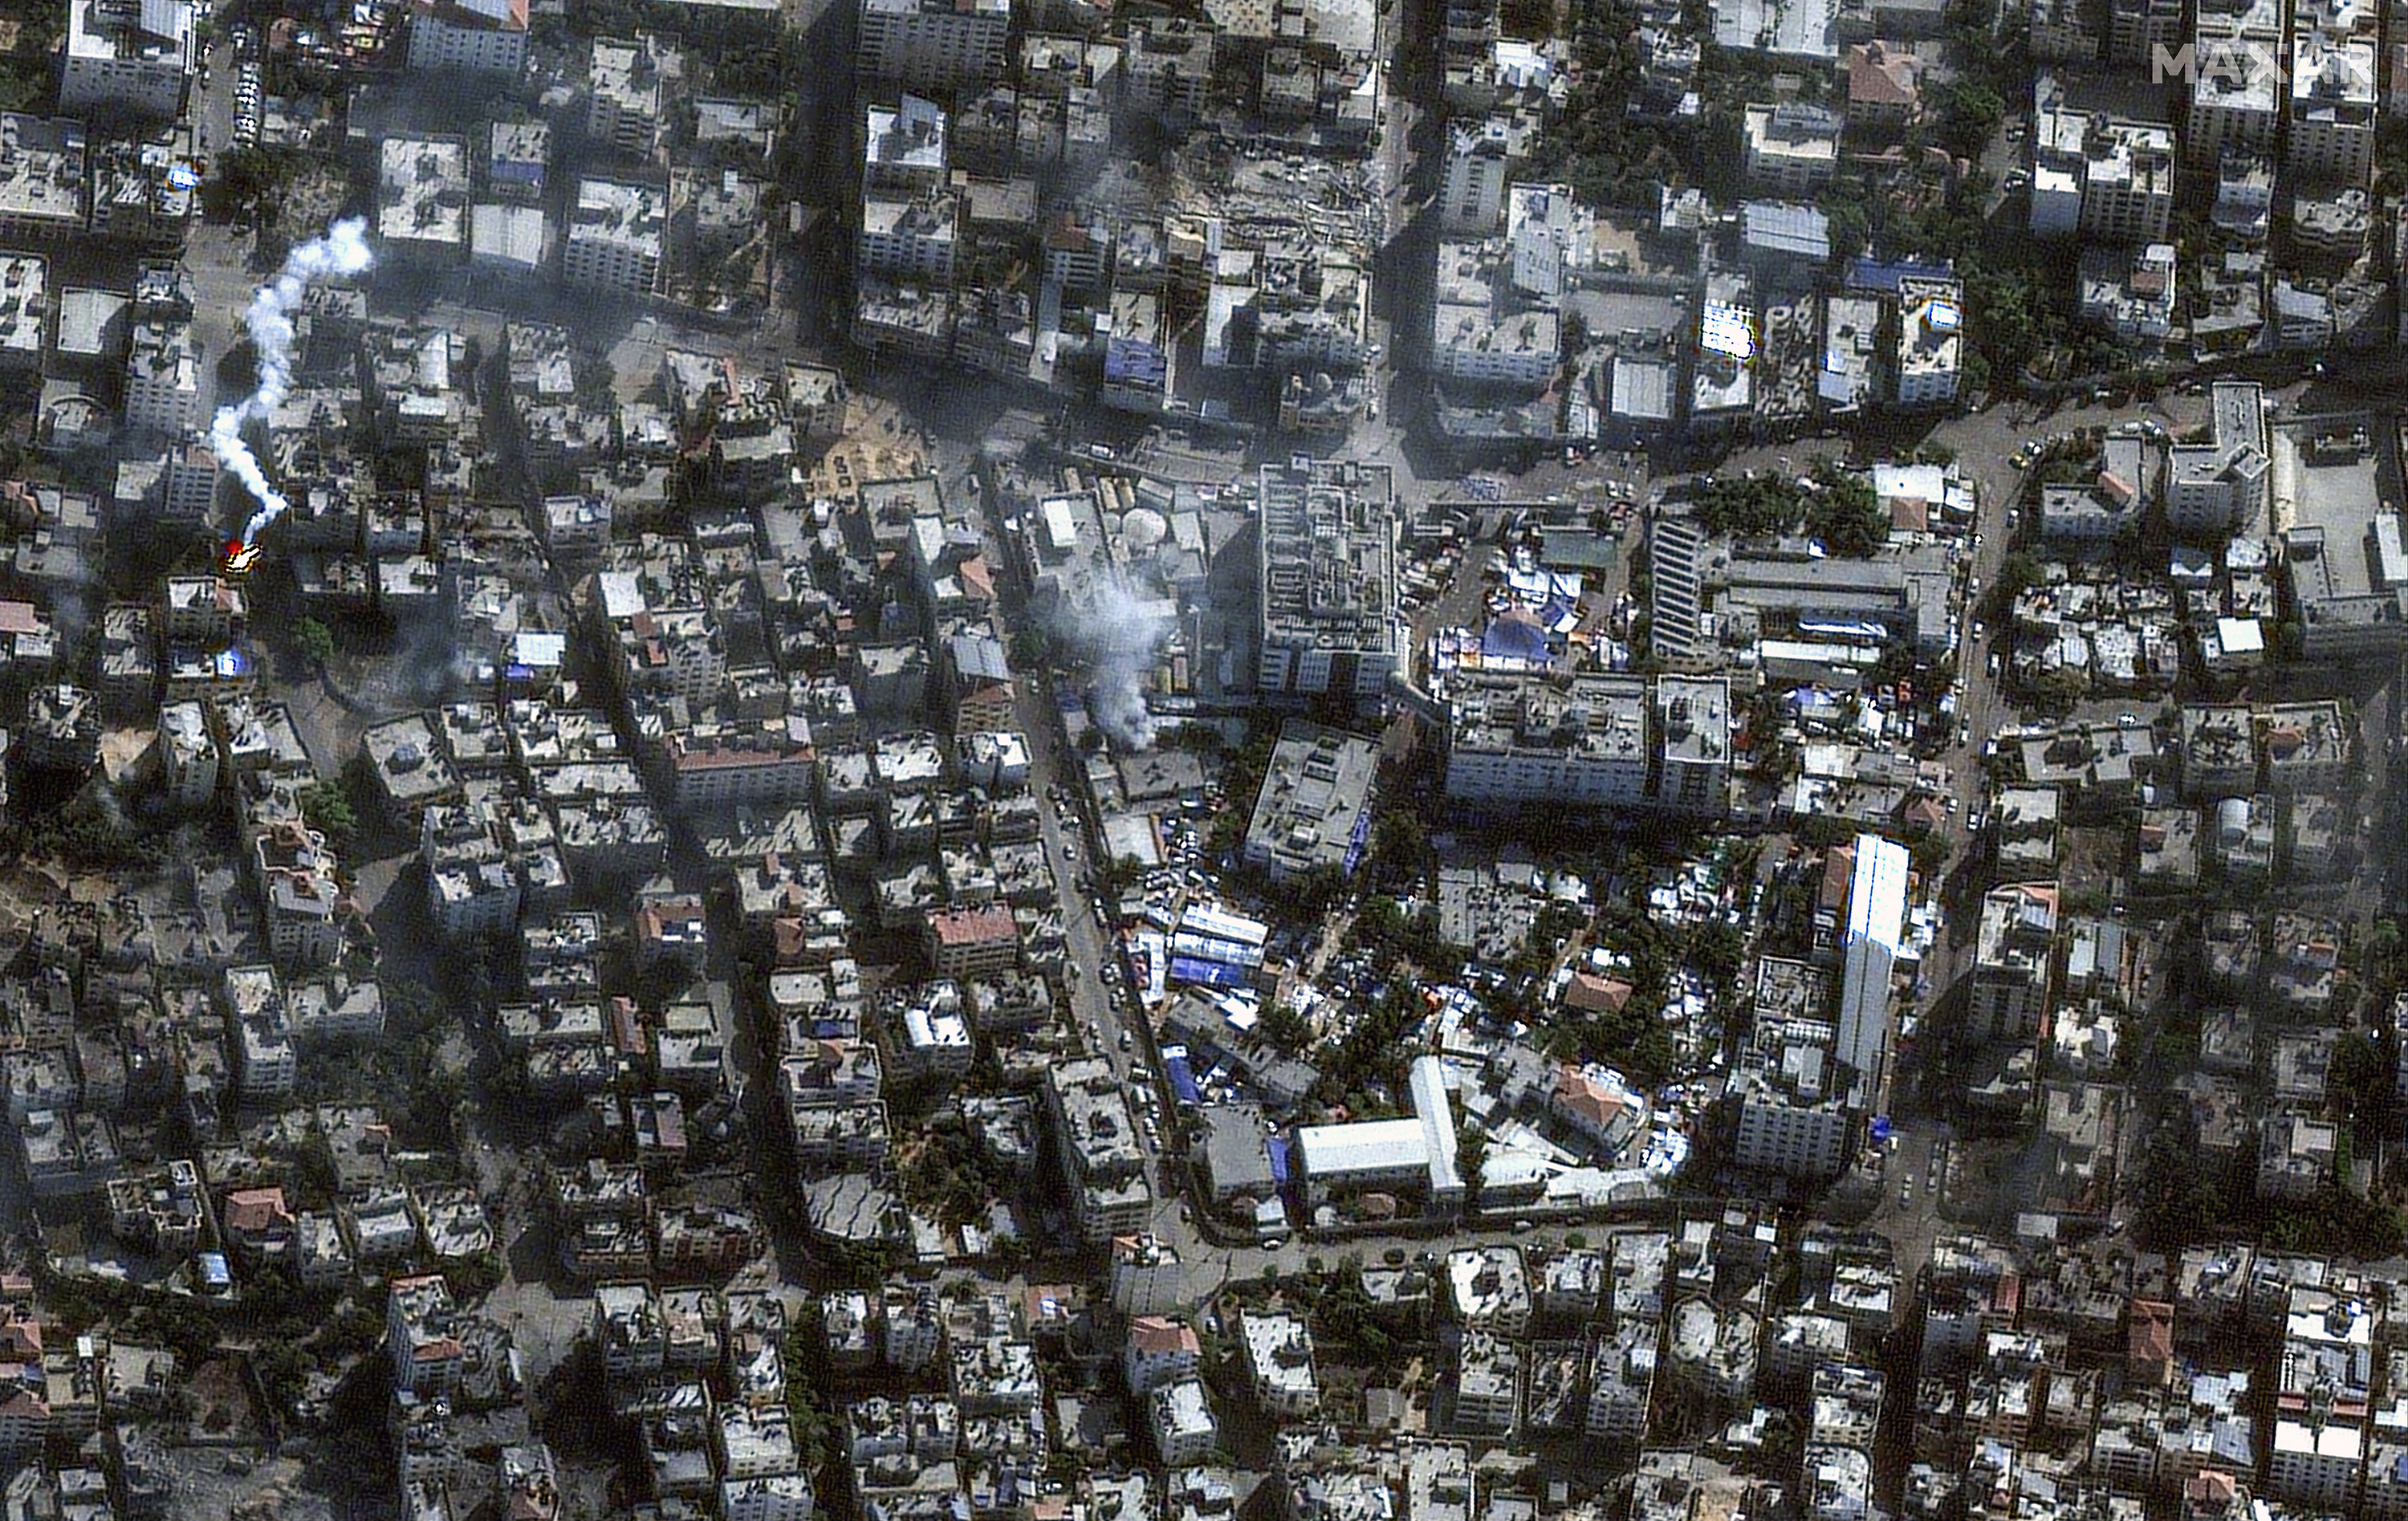 A satellite image provided by Maxar Technologies shows Al-Shifa hospital and surroundings in Gaza City on November 11. 